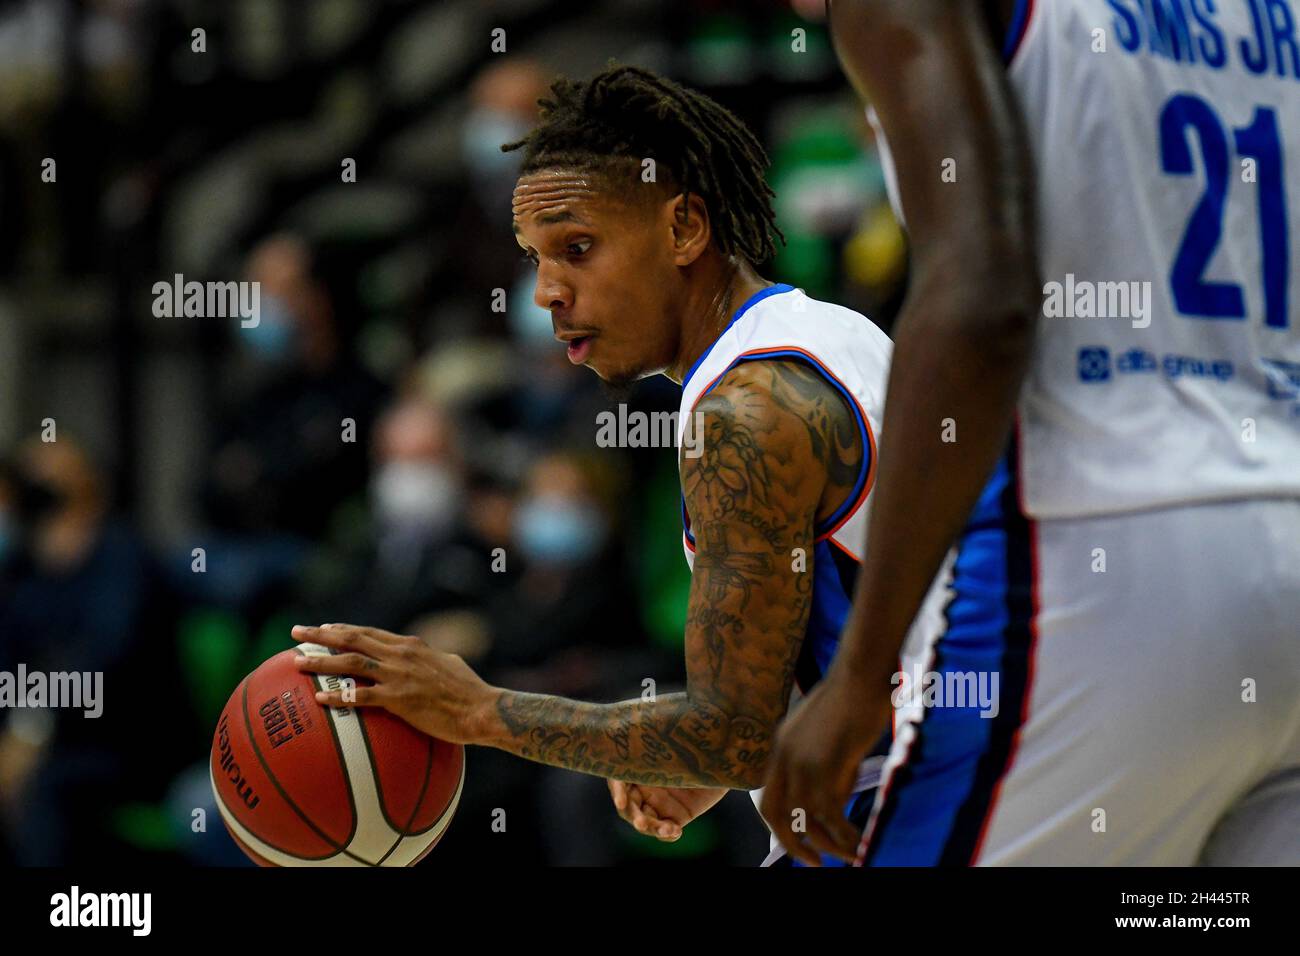 Treviso, Italy. 31st Oct, 2021. Dewayne Russell (Treviso) during Nutribullet Treviso Basket vs Openjobmetis Varese, Italian Basketball A Serie Championship in Treviso, Italy, October 31 2021 Credit: Independent Photo Agency/Alamy Live News Stock Photo